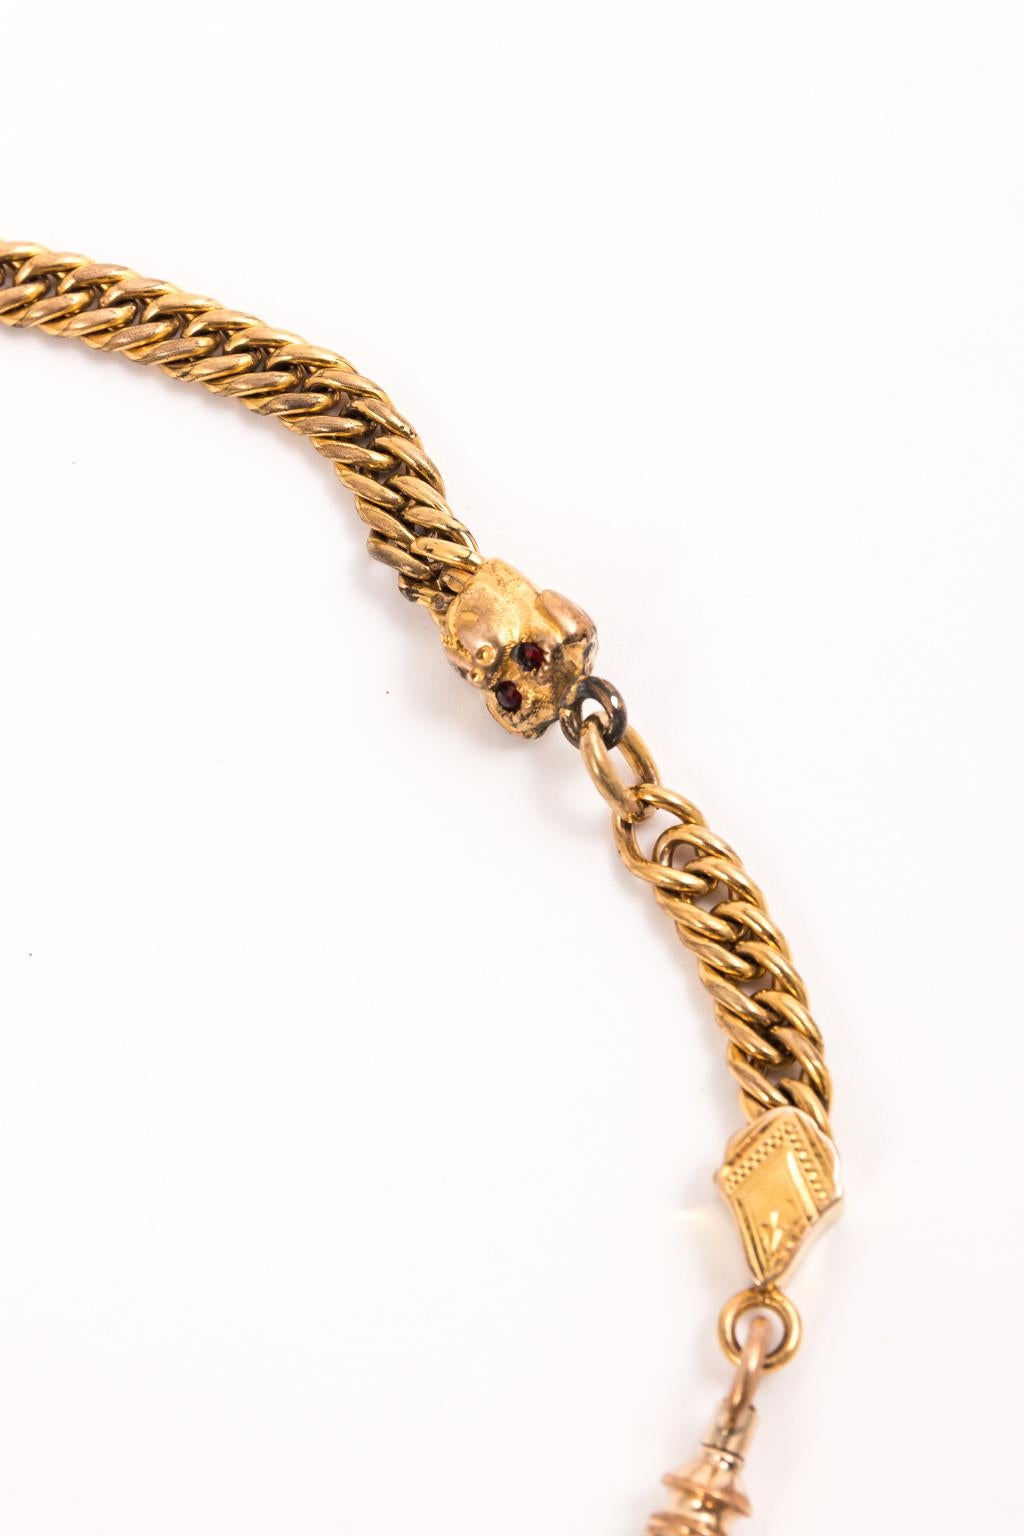 Women's Gold Filled Figural Watch Chain Necklace